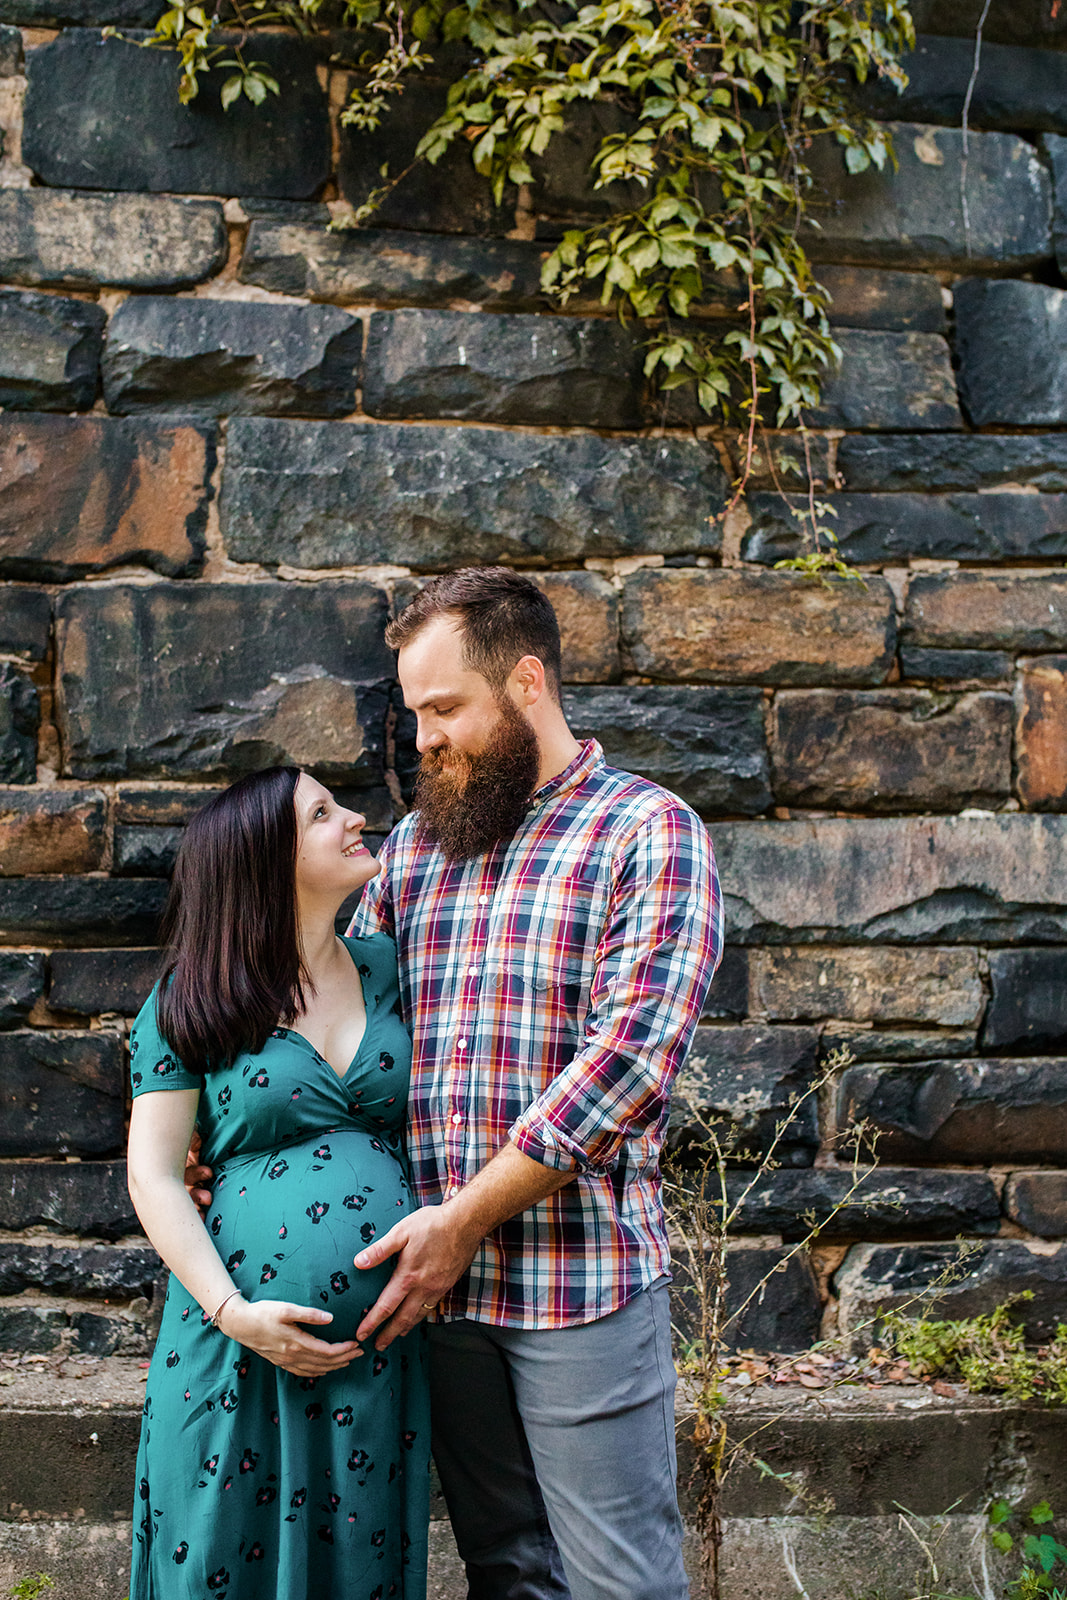 Old Town Alexandria Virginia Maternity Photo Shoot with Dogs - Image Property of www.j-dphoto.com